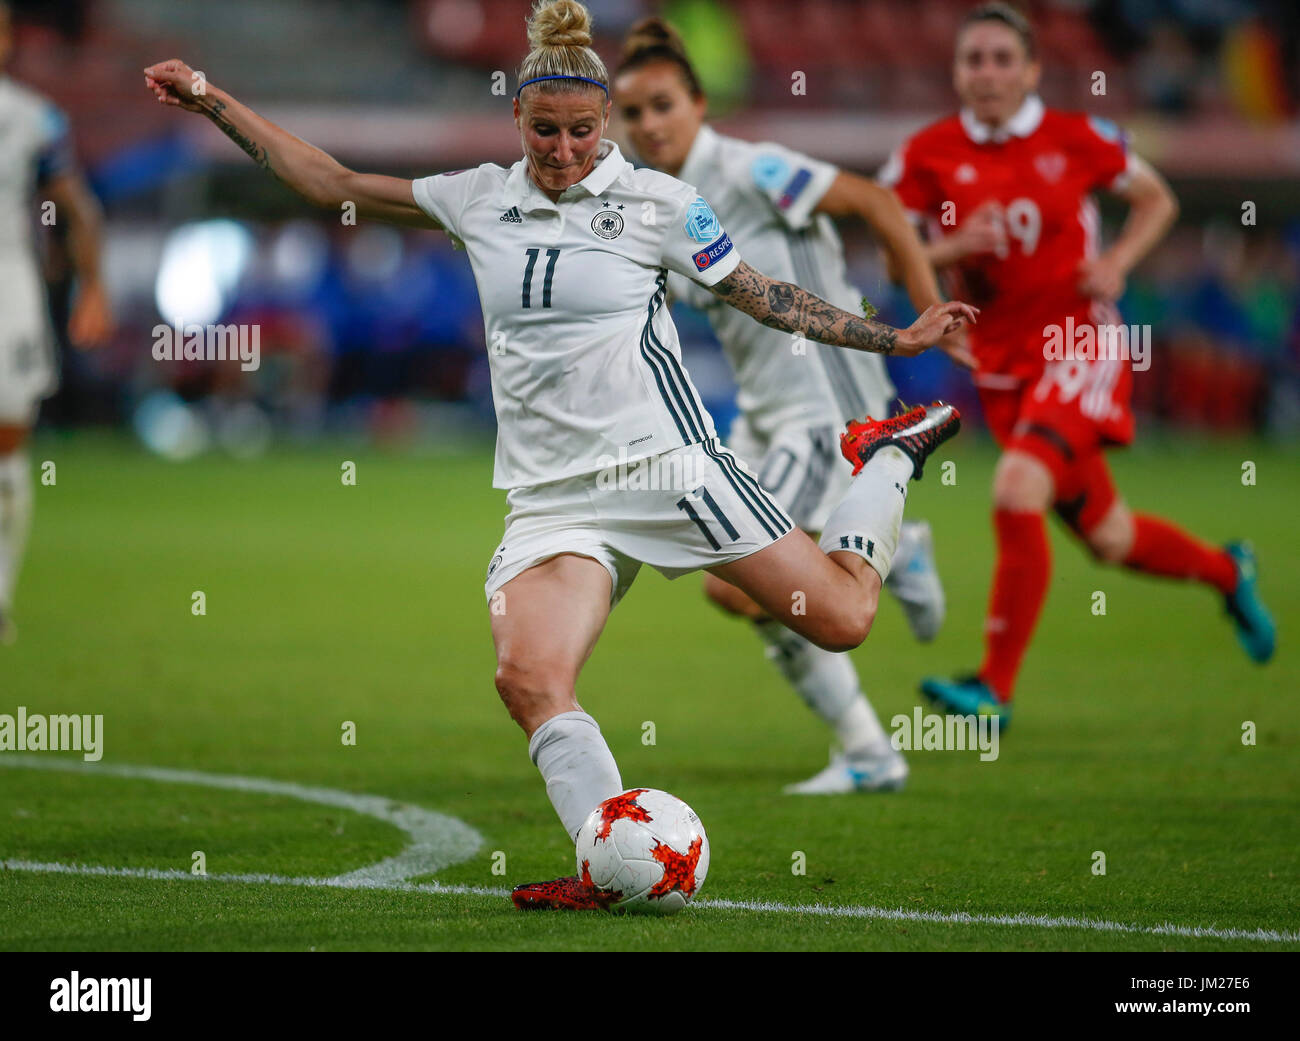 Utrecht, Netherlands. 25th July, 2017. Anja Mittag (front) of Germany shoots during the UEFA Women's EURO 2017 soccer tournament Group B match between Germany and Russia in Utrecht, the Netherlands, July 25, 2017. Germany won 2-0. Credit: Ye Pingfan/Xinhua/Alamy Live News Stock Photo